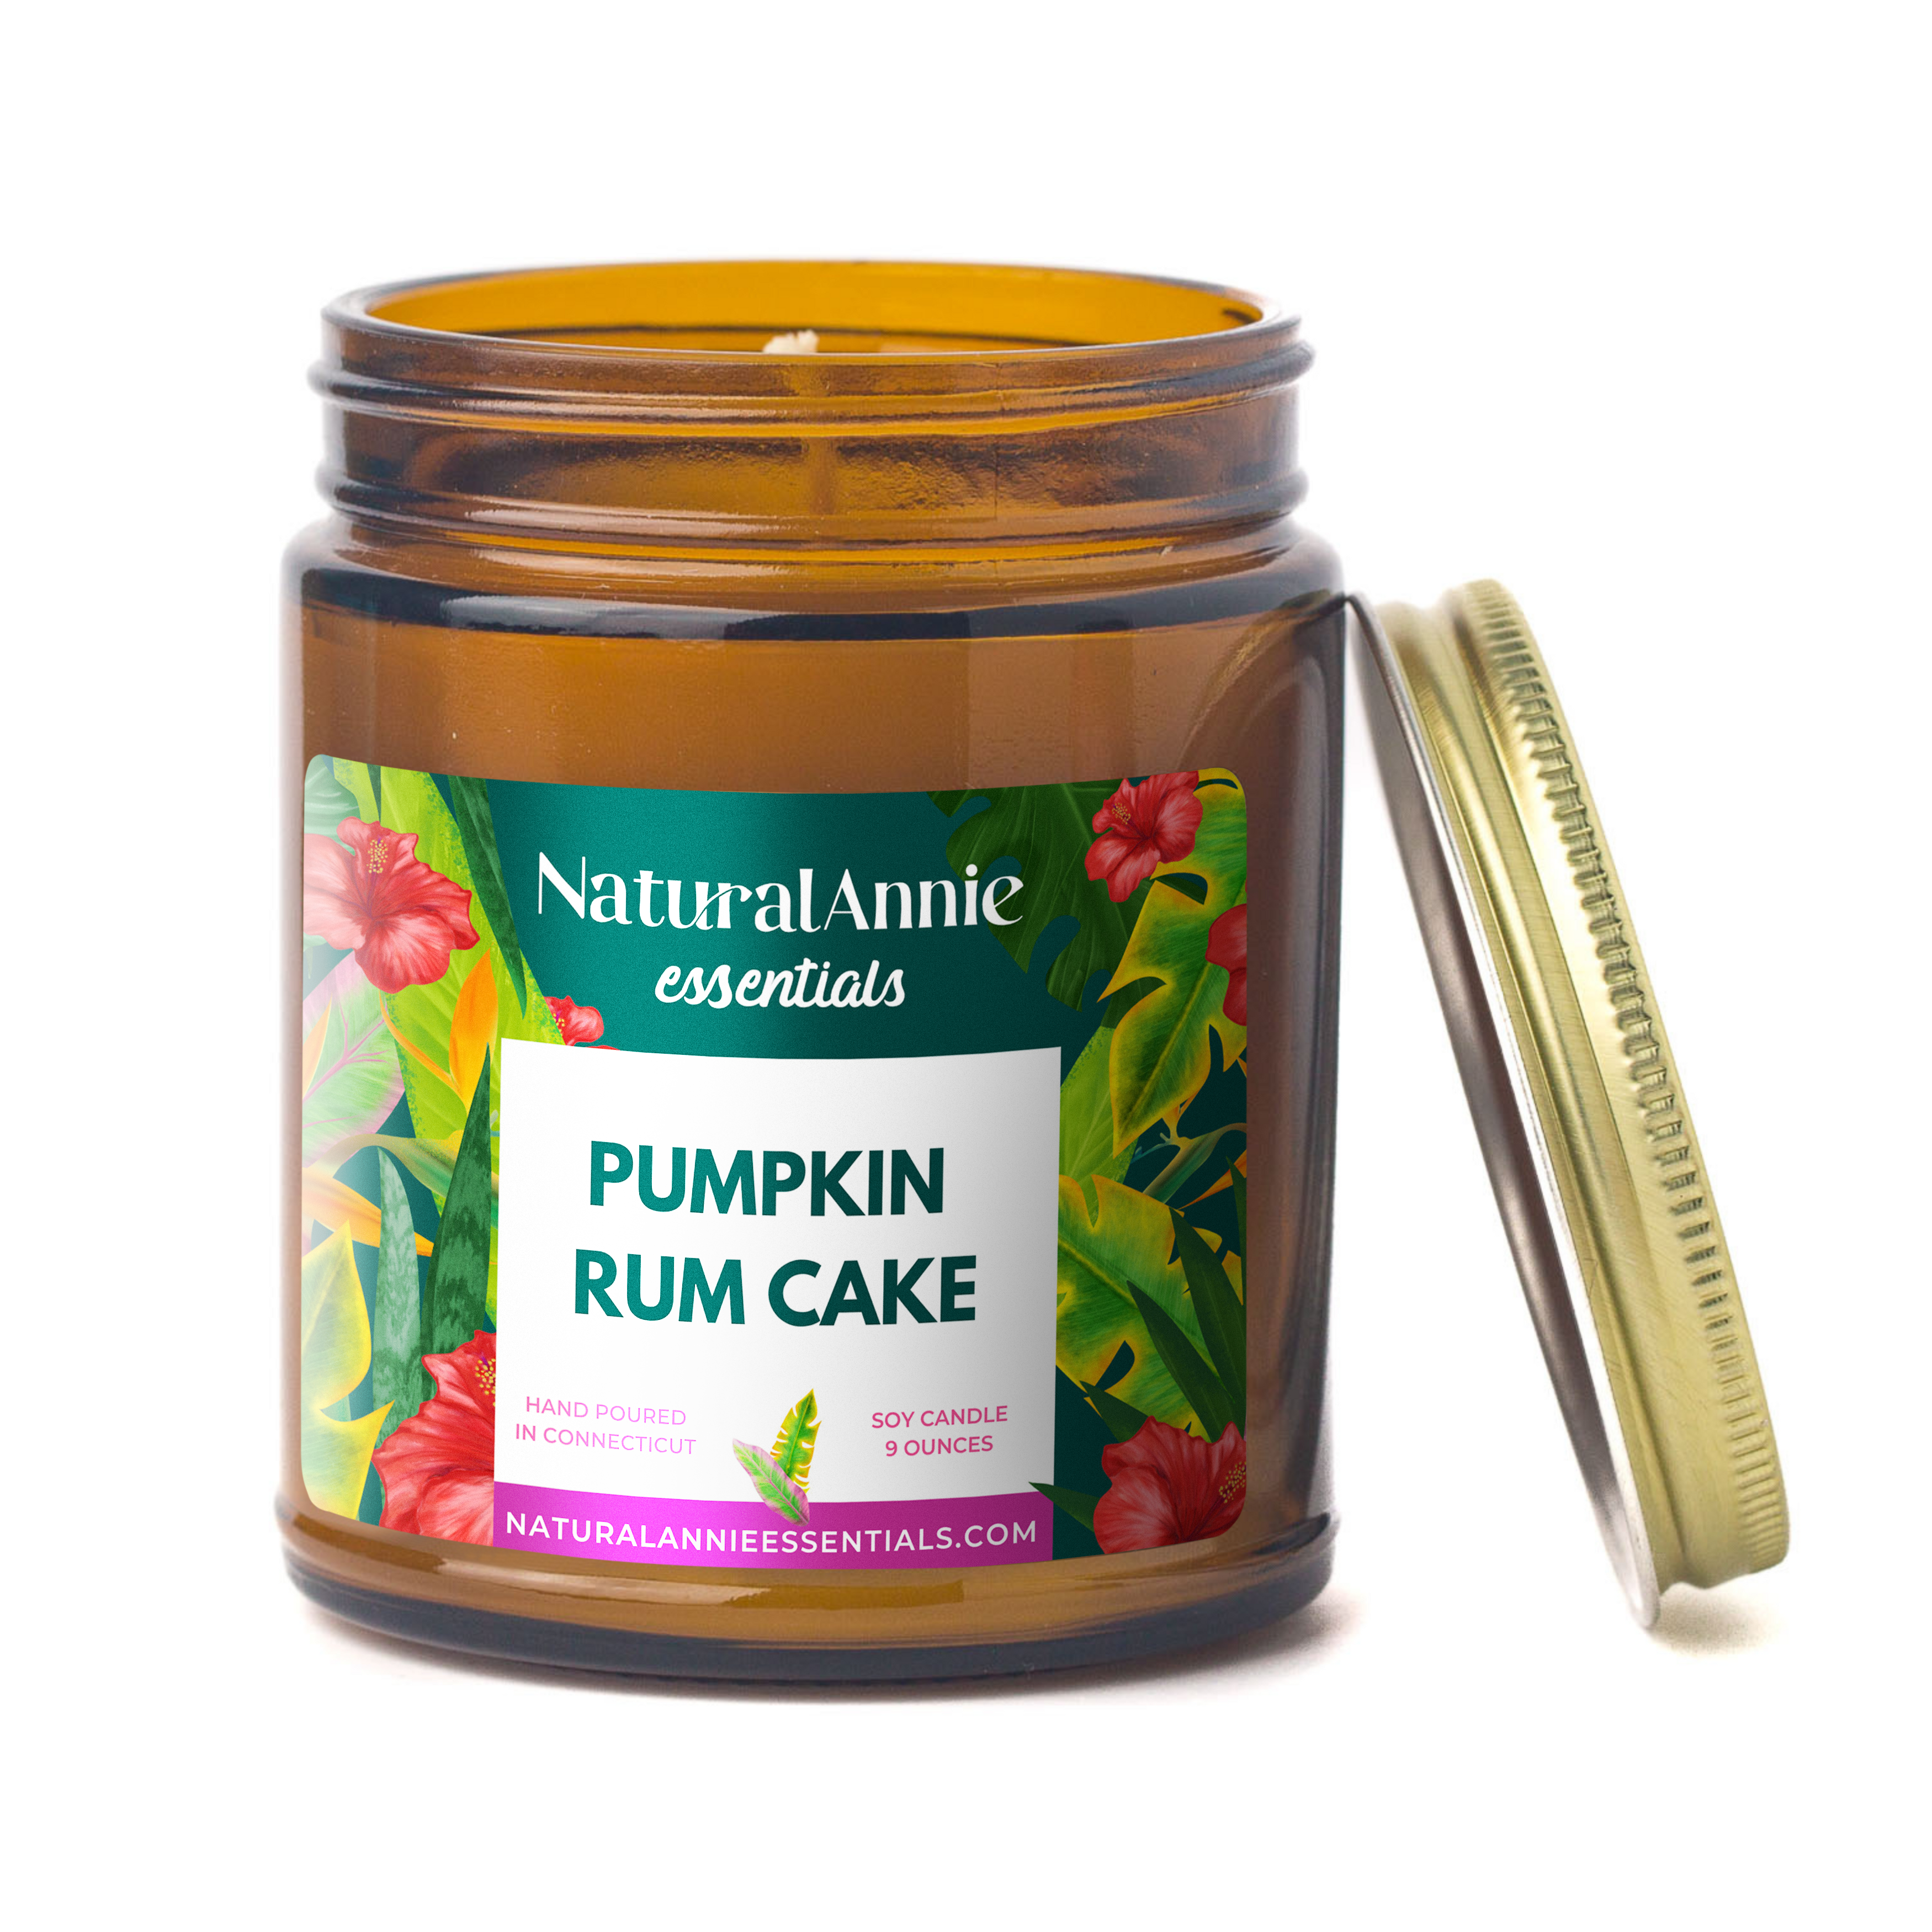 Pumpkin rum cake 9 oz Scented Soy Candle